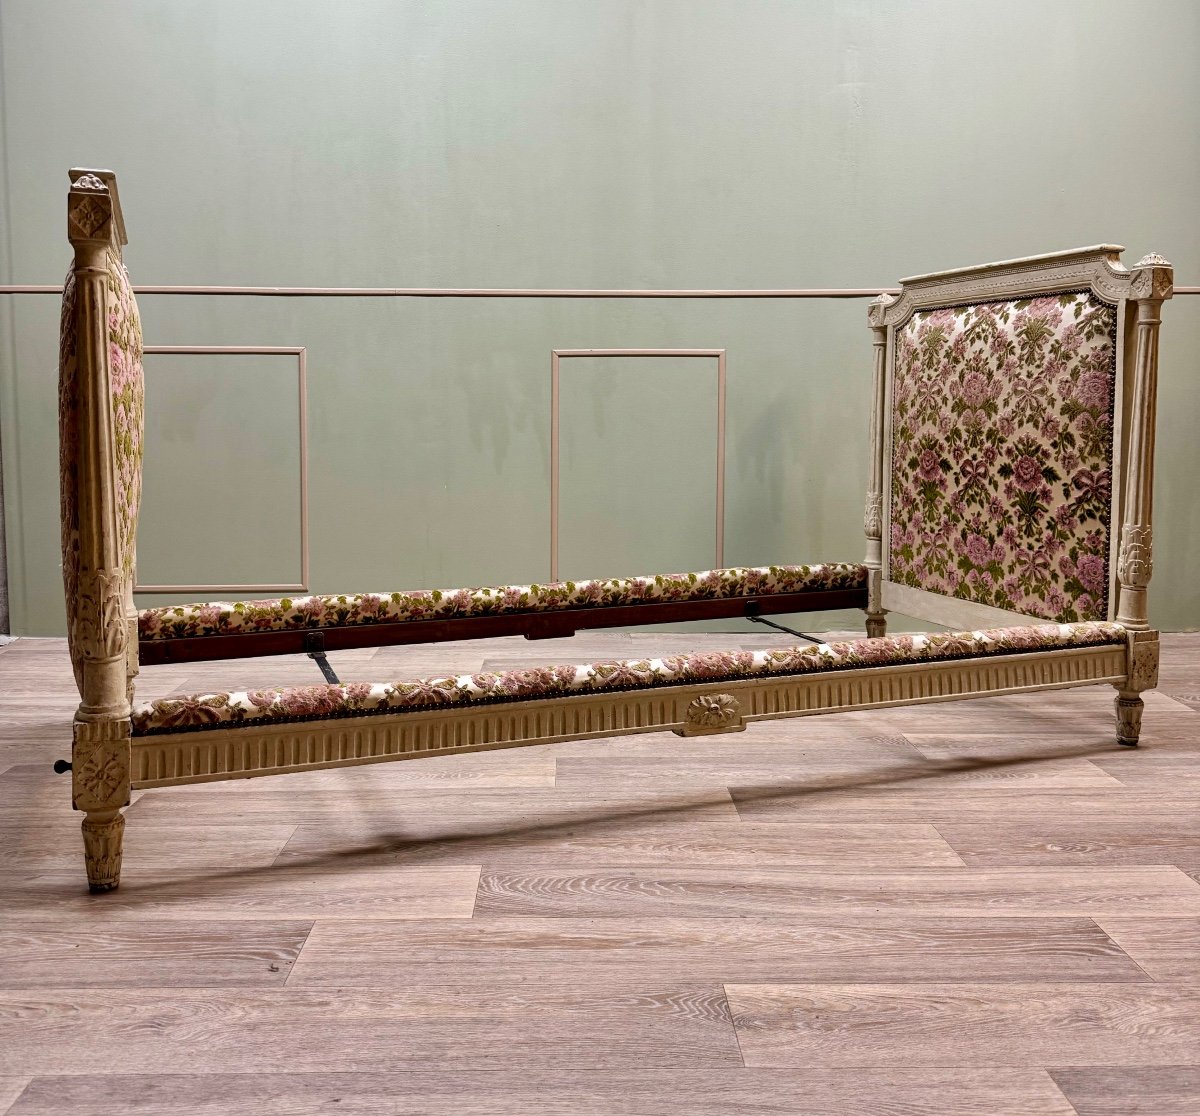 Georges Jacob Stamped Alcove Bed In Lacquered Wood From Louis XVI XVIII Eme Century -photo-2